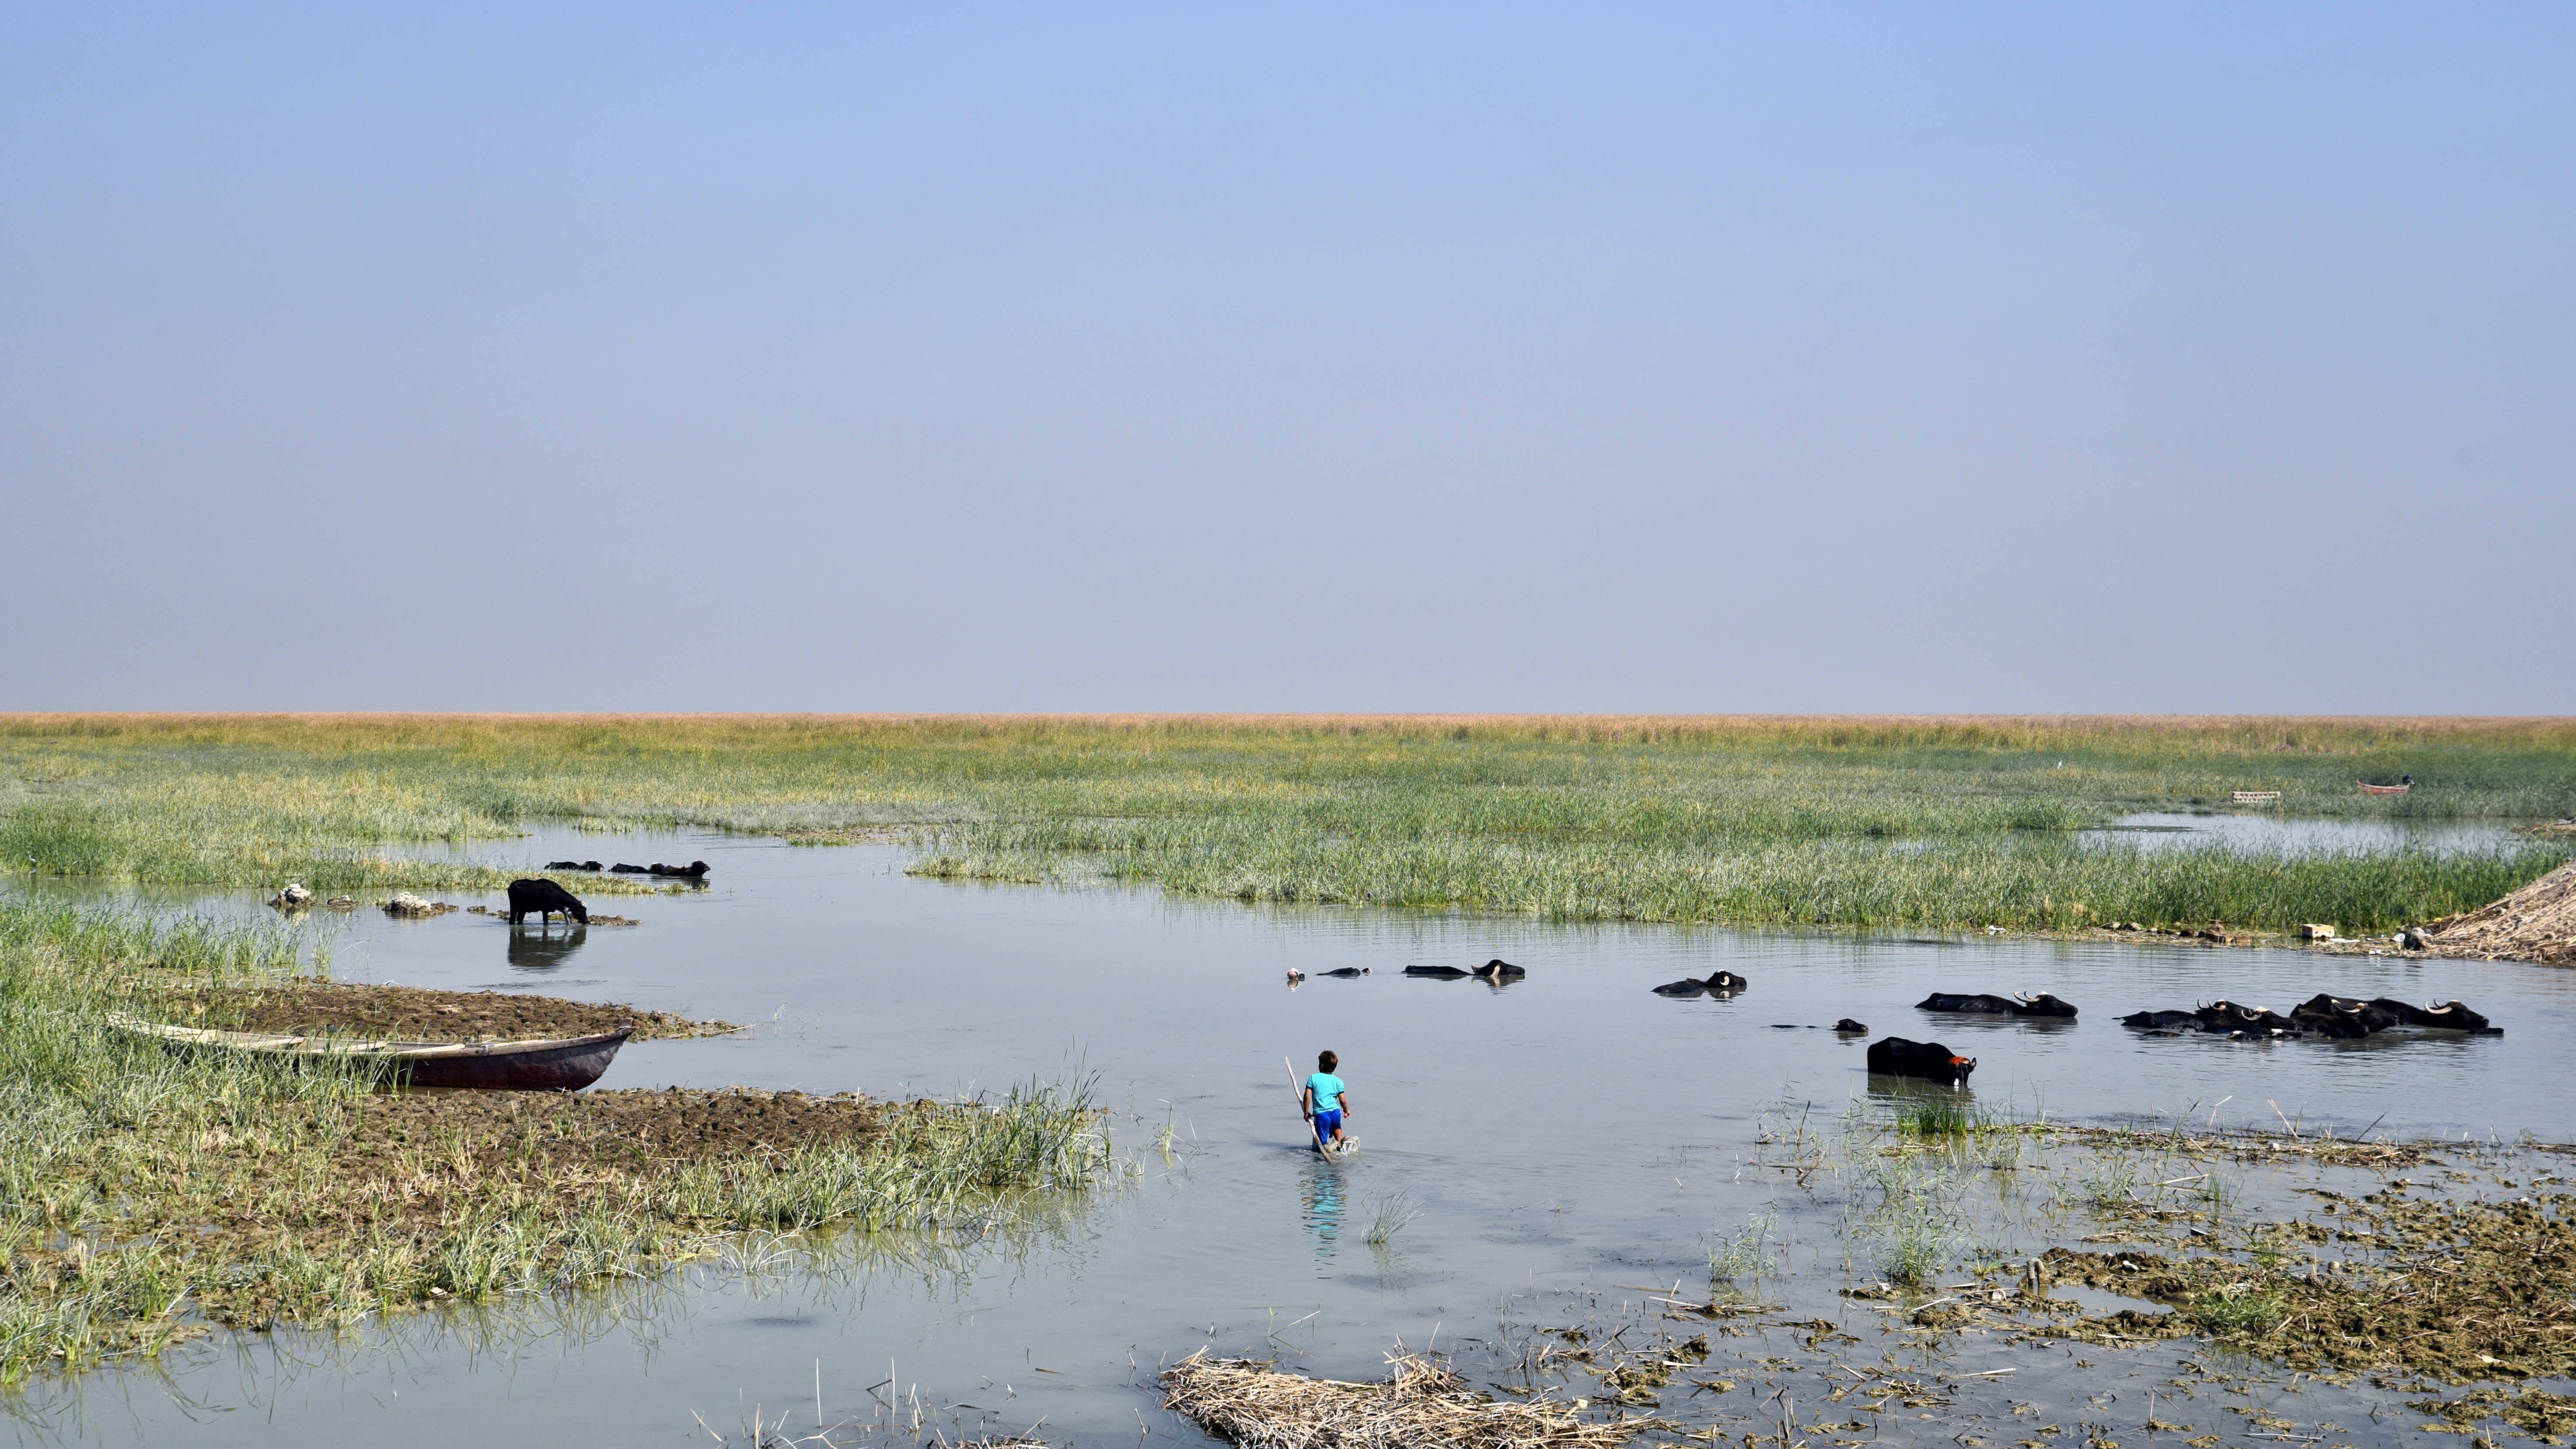 A figure stands in water surrounded by reed beds and bathing cattle in Iraq's famous marshes; a boat can be seen left of frame